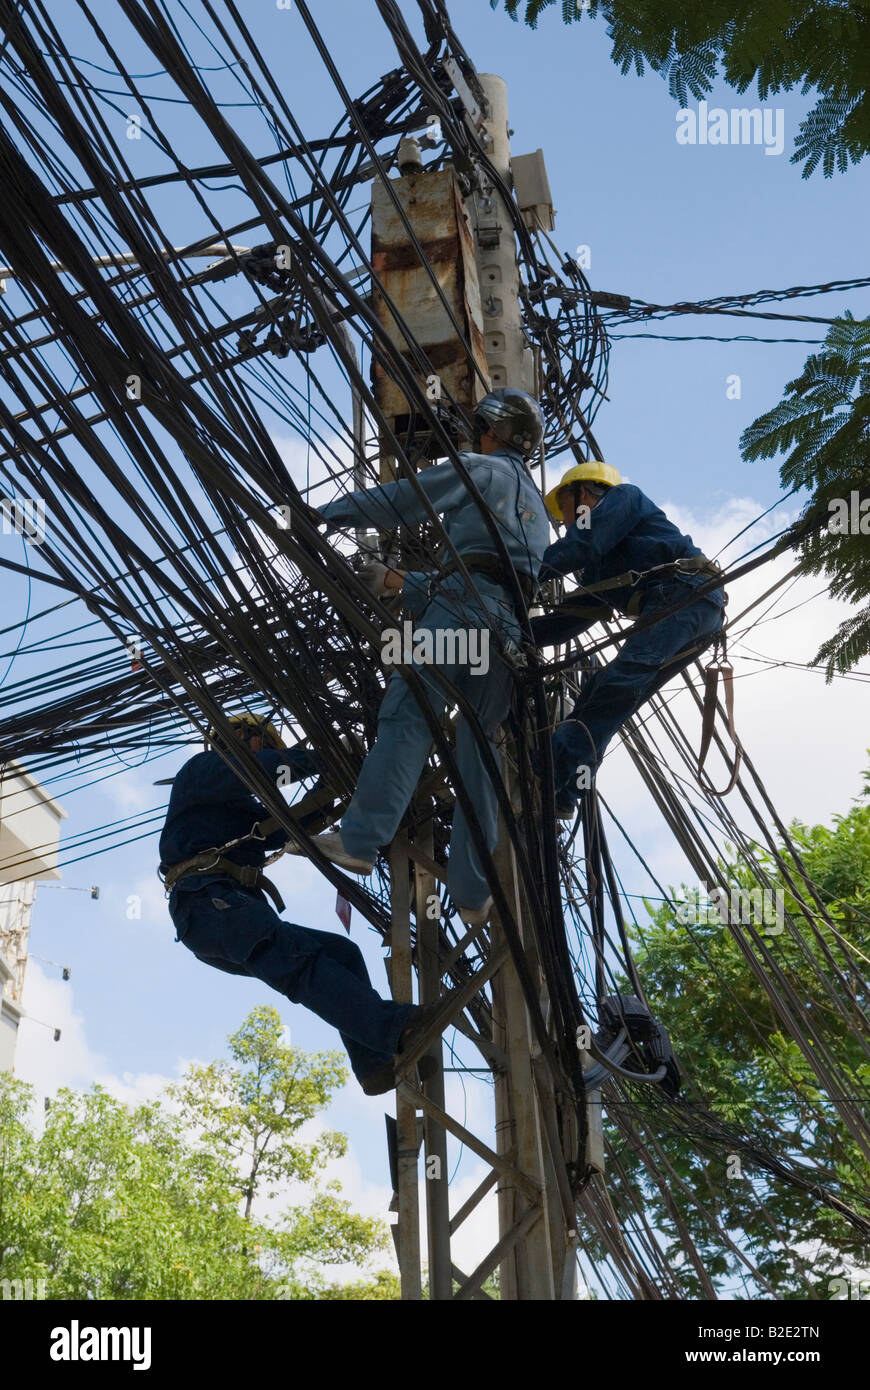 A power line maintenance crew high on a pole work on the complex tangle of electrical wires that power Ho Chi Minh City, Vietnam Stock Photo